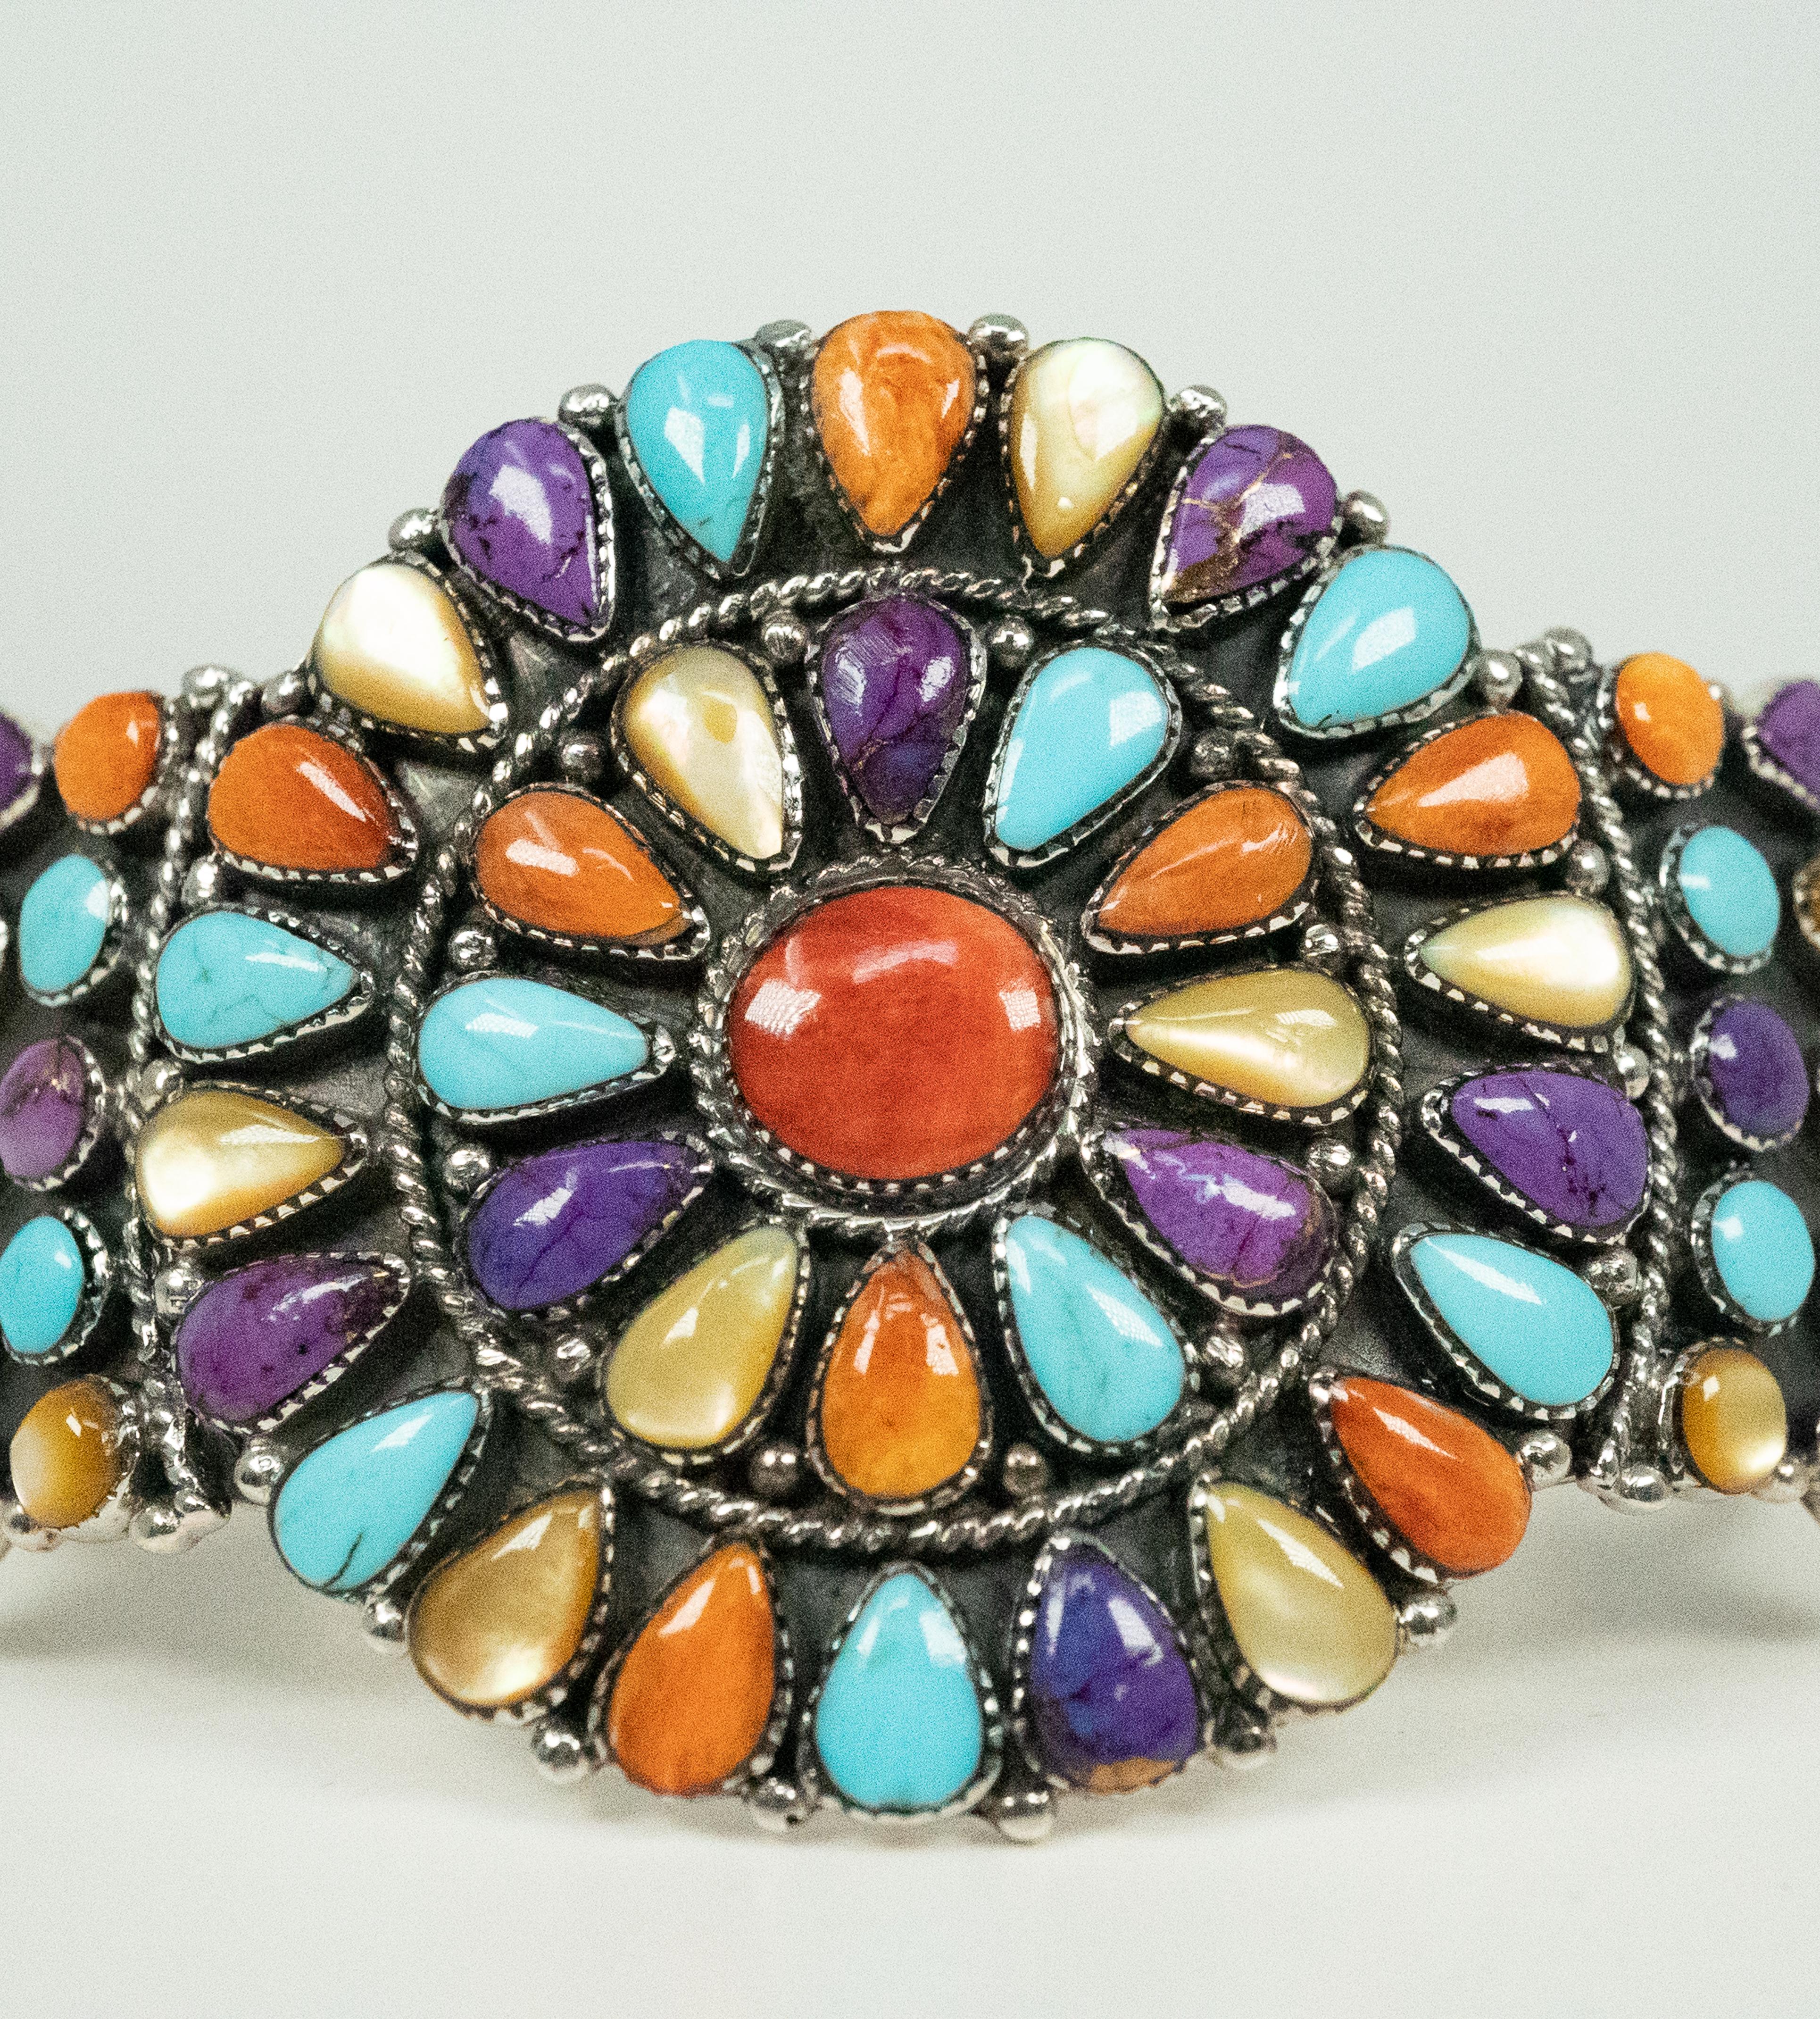 This stunning sterling silver cuff bracelet features beautiful coral, turquoise and hardstones!